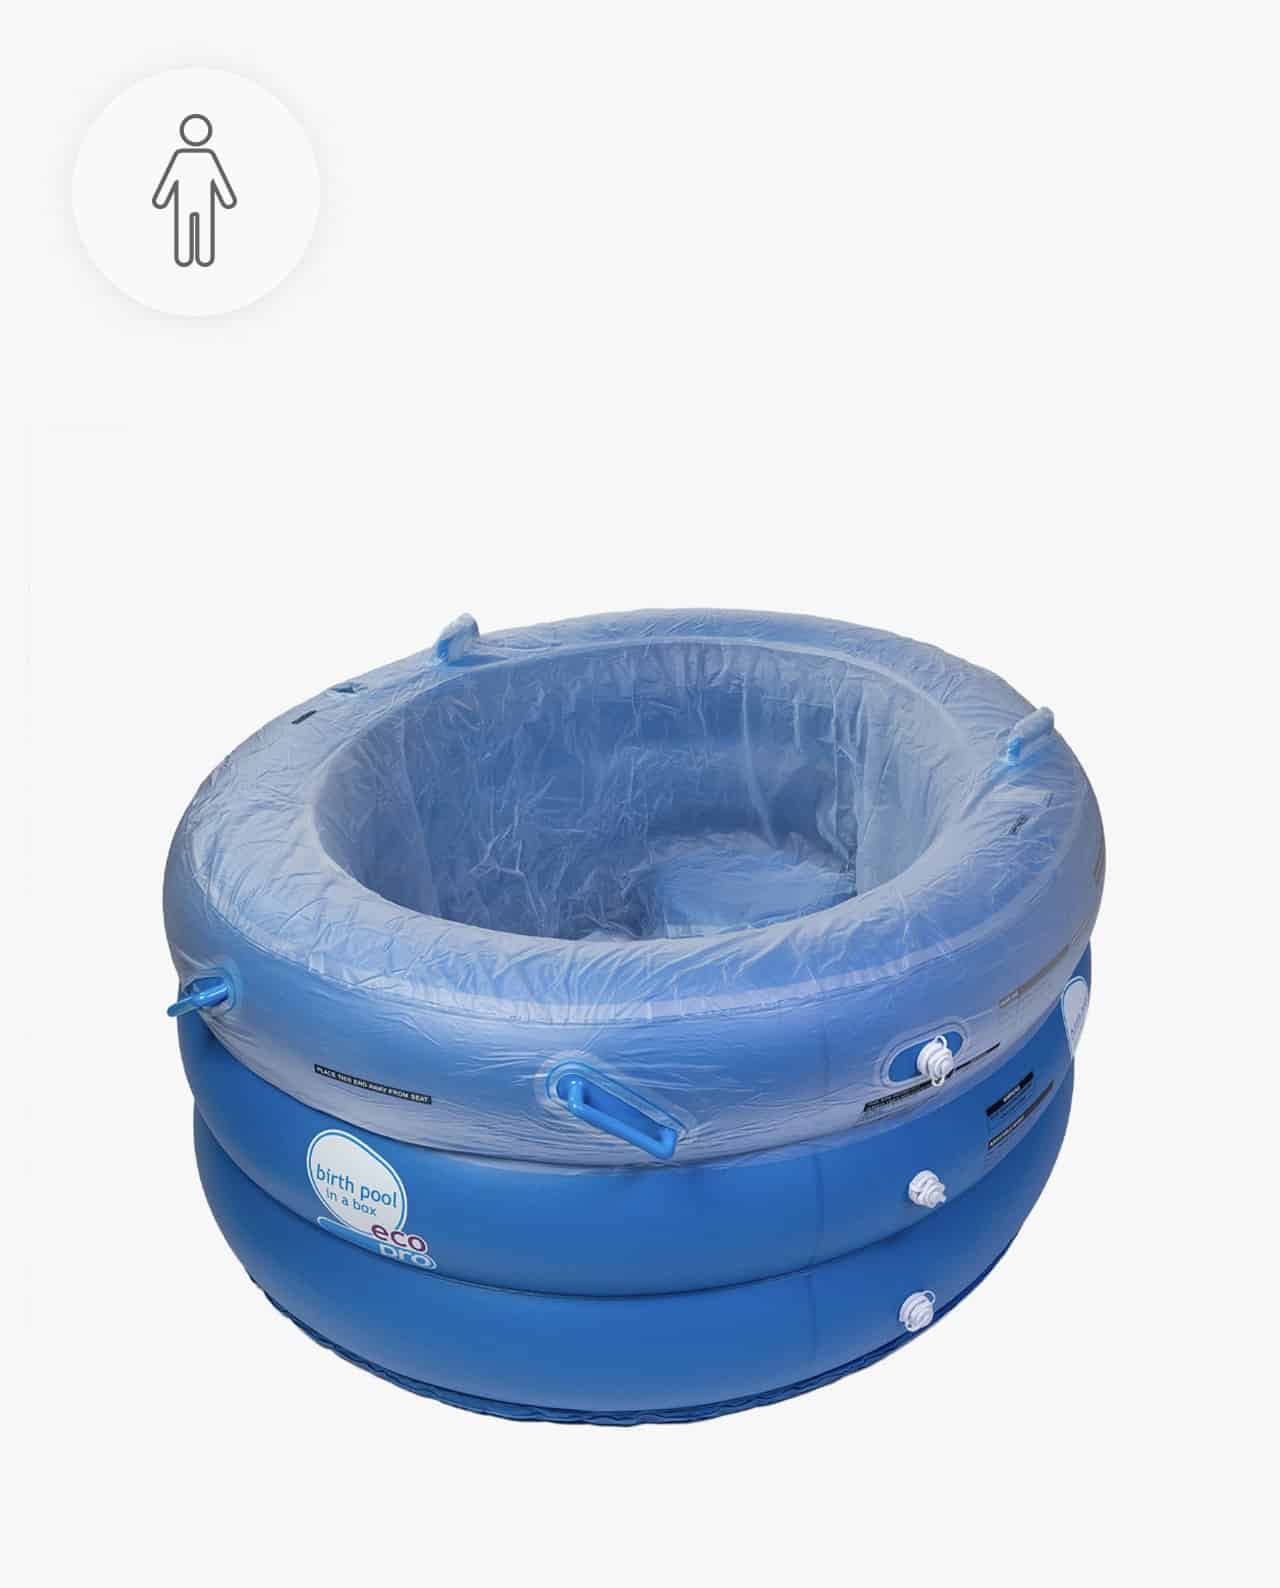 How to use a birth pool